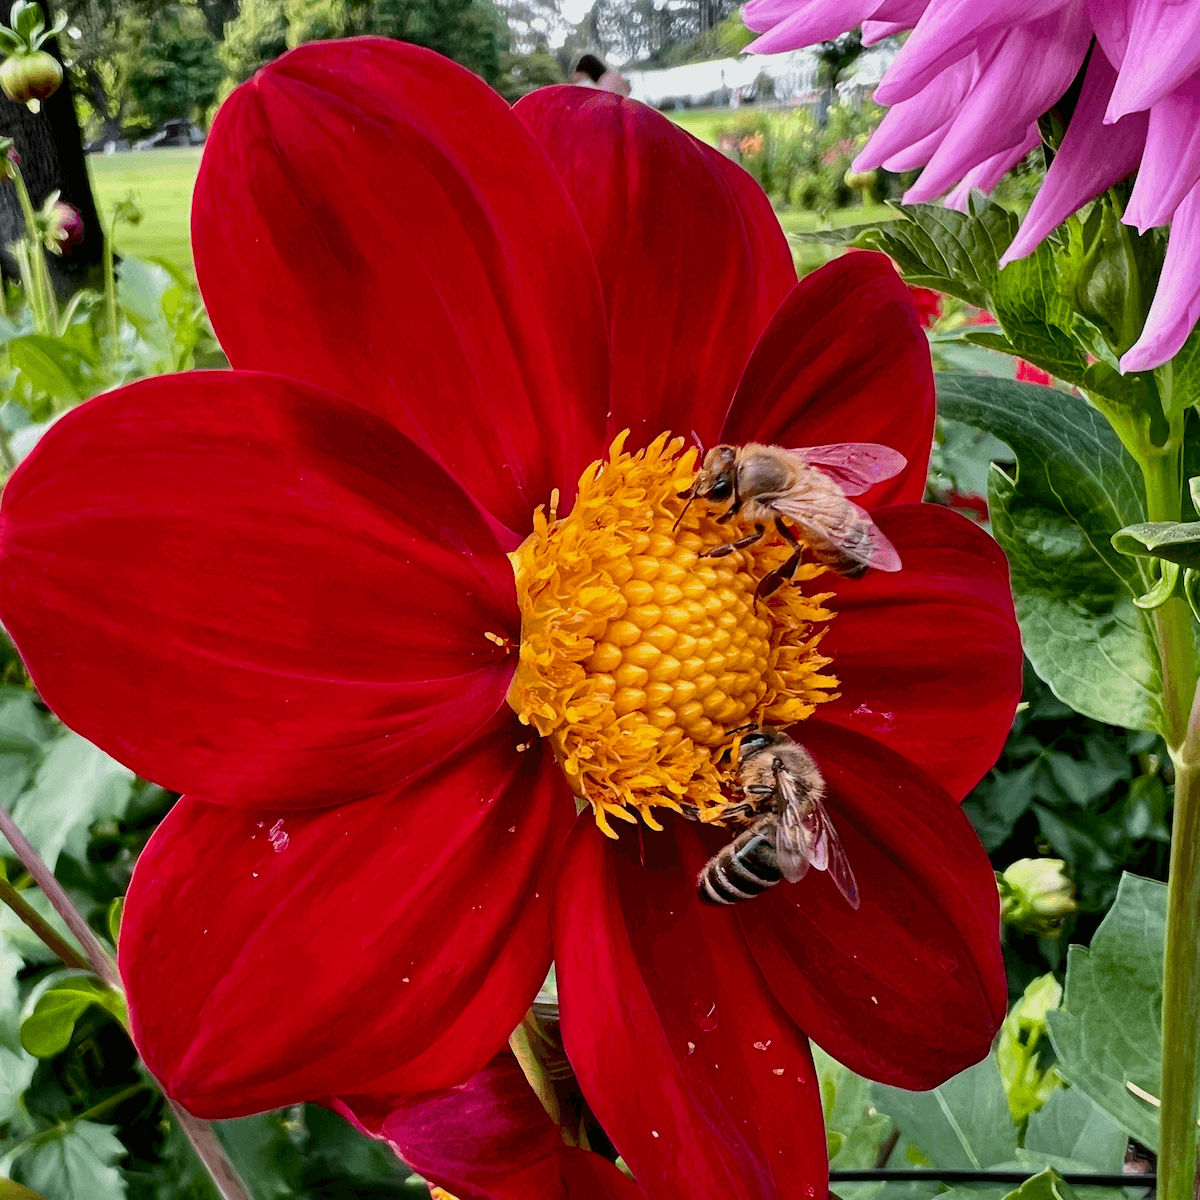 Two bees scan a red and yellow dahlia flower for pollen in this shot of up close nature connection.